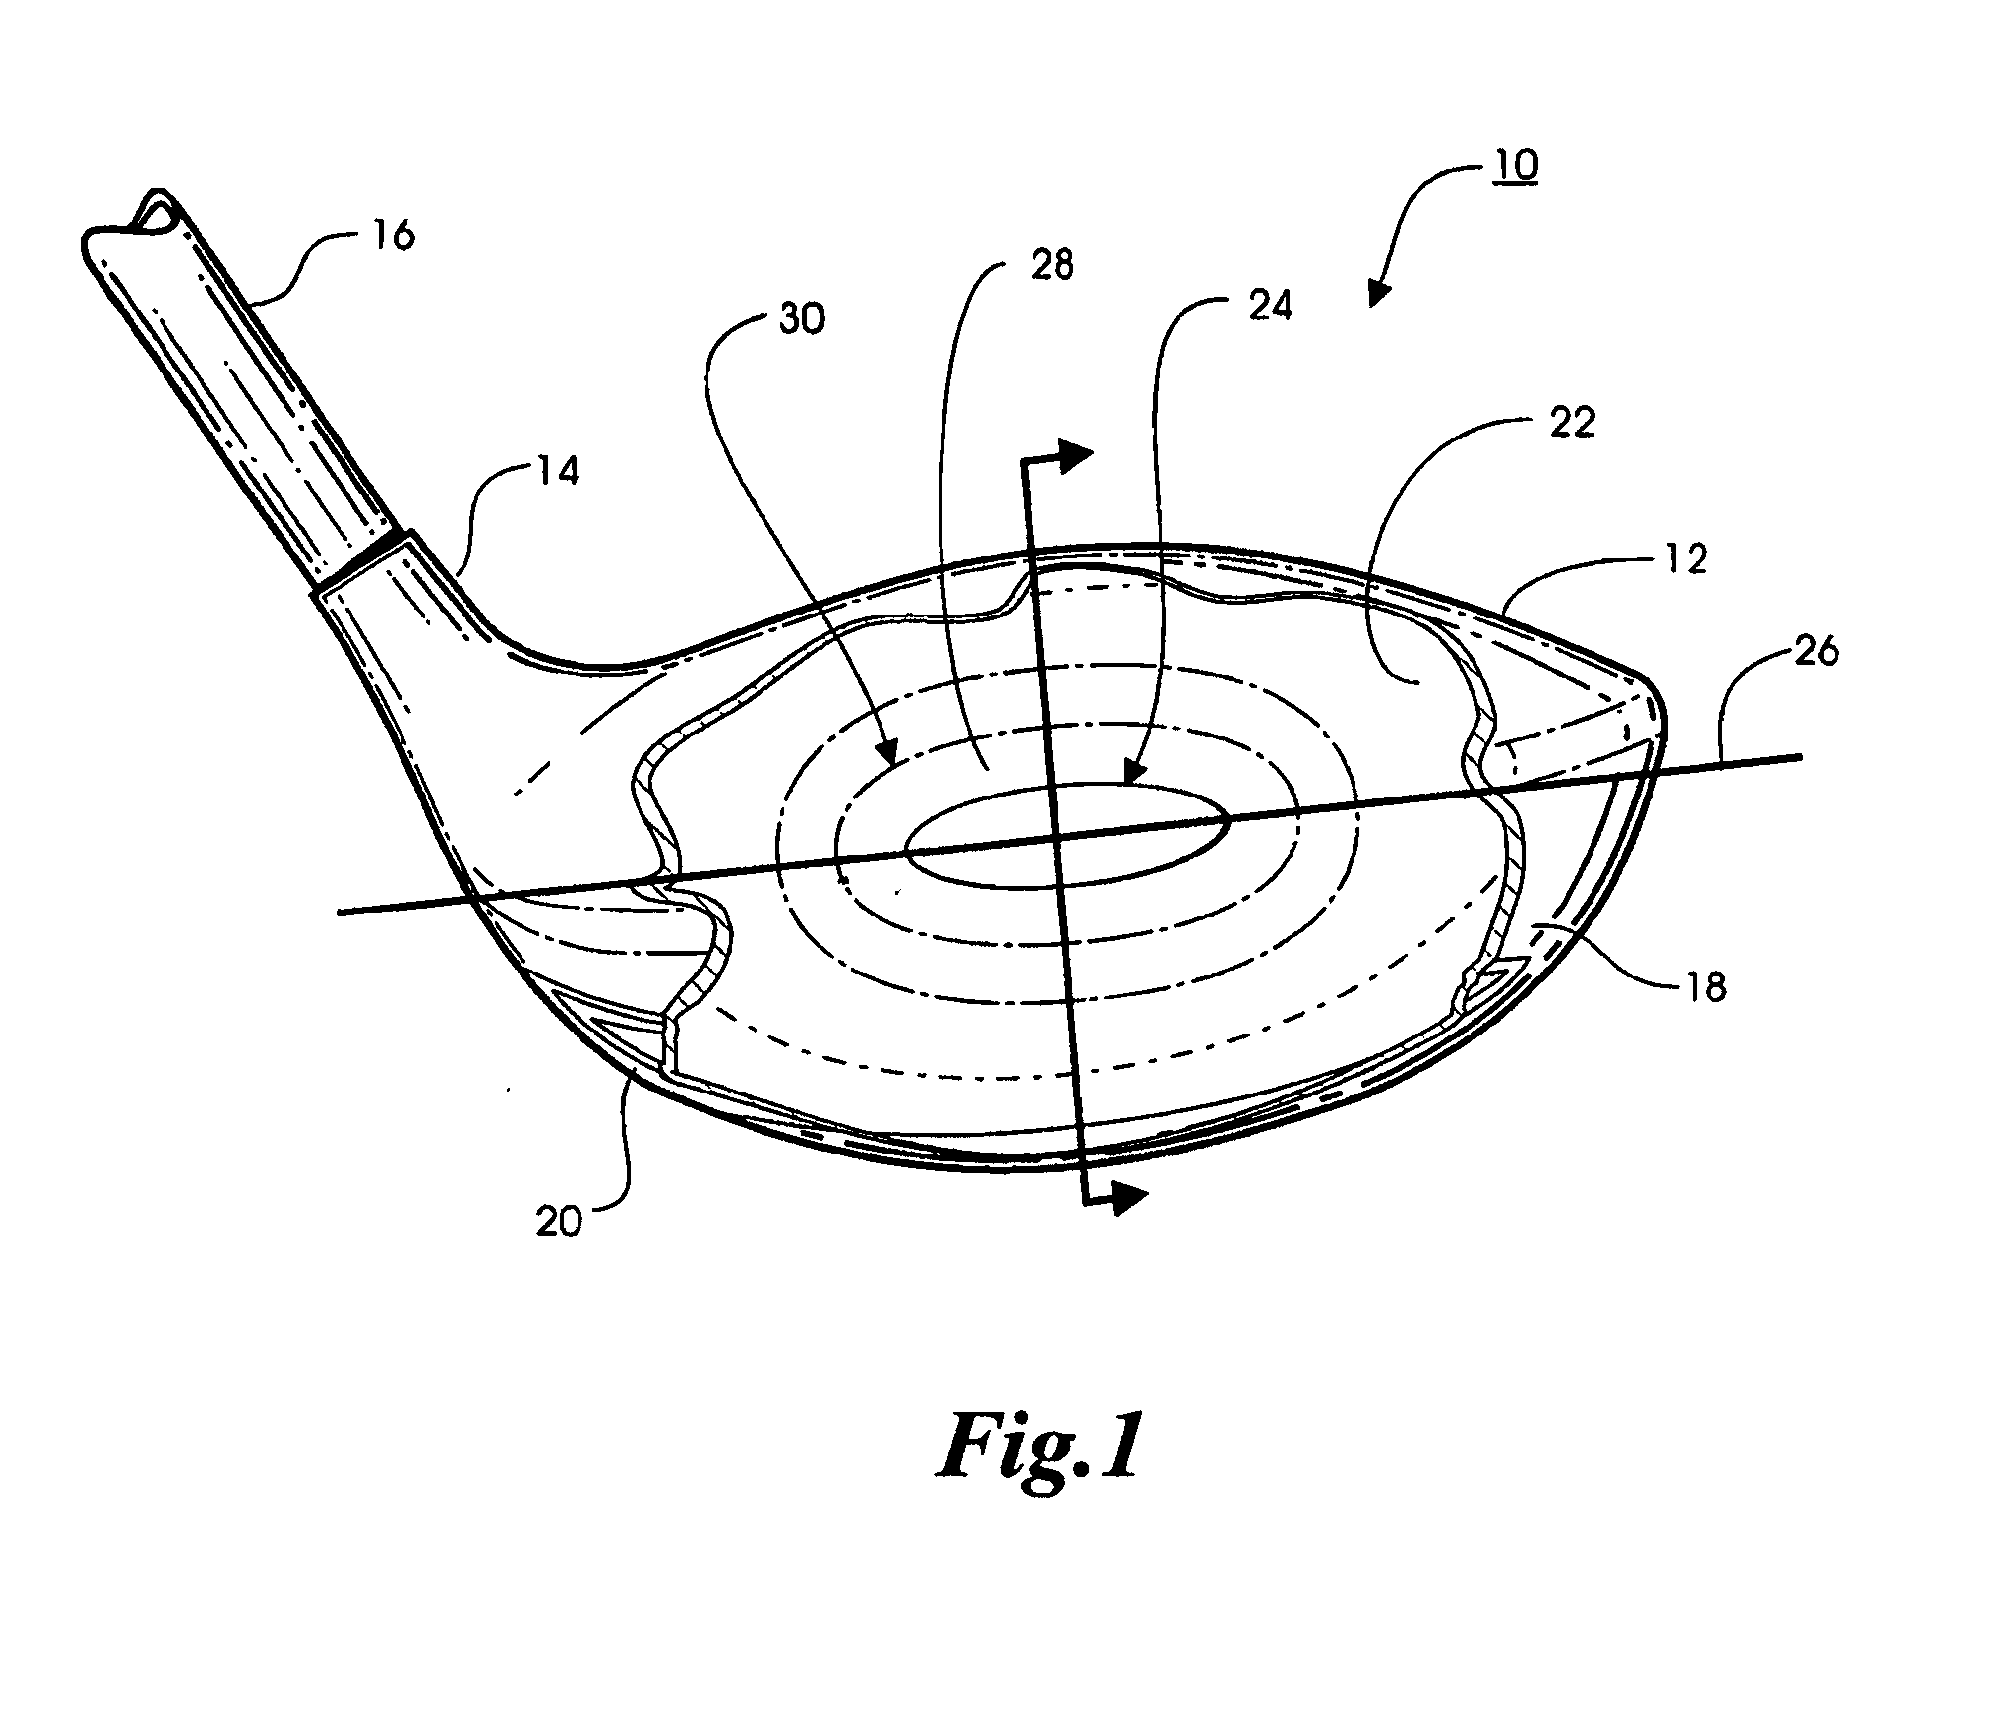 Method of manufacturing a golf club face